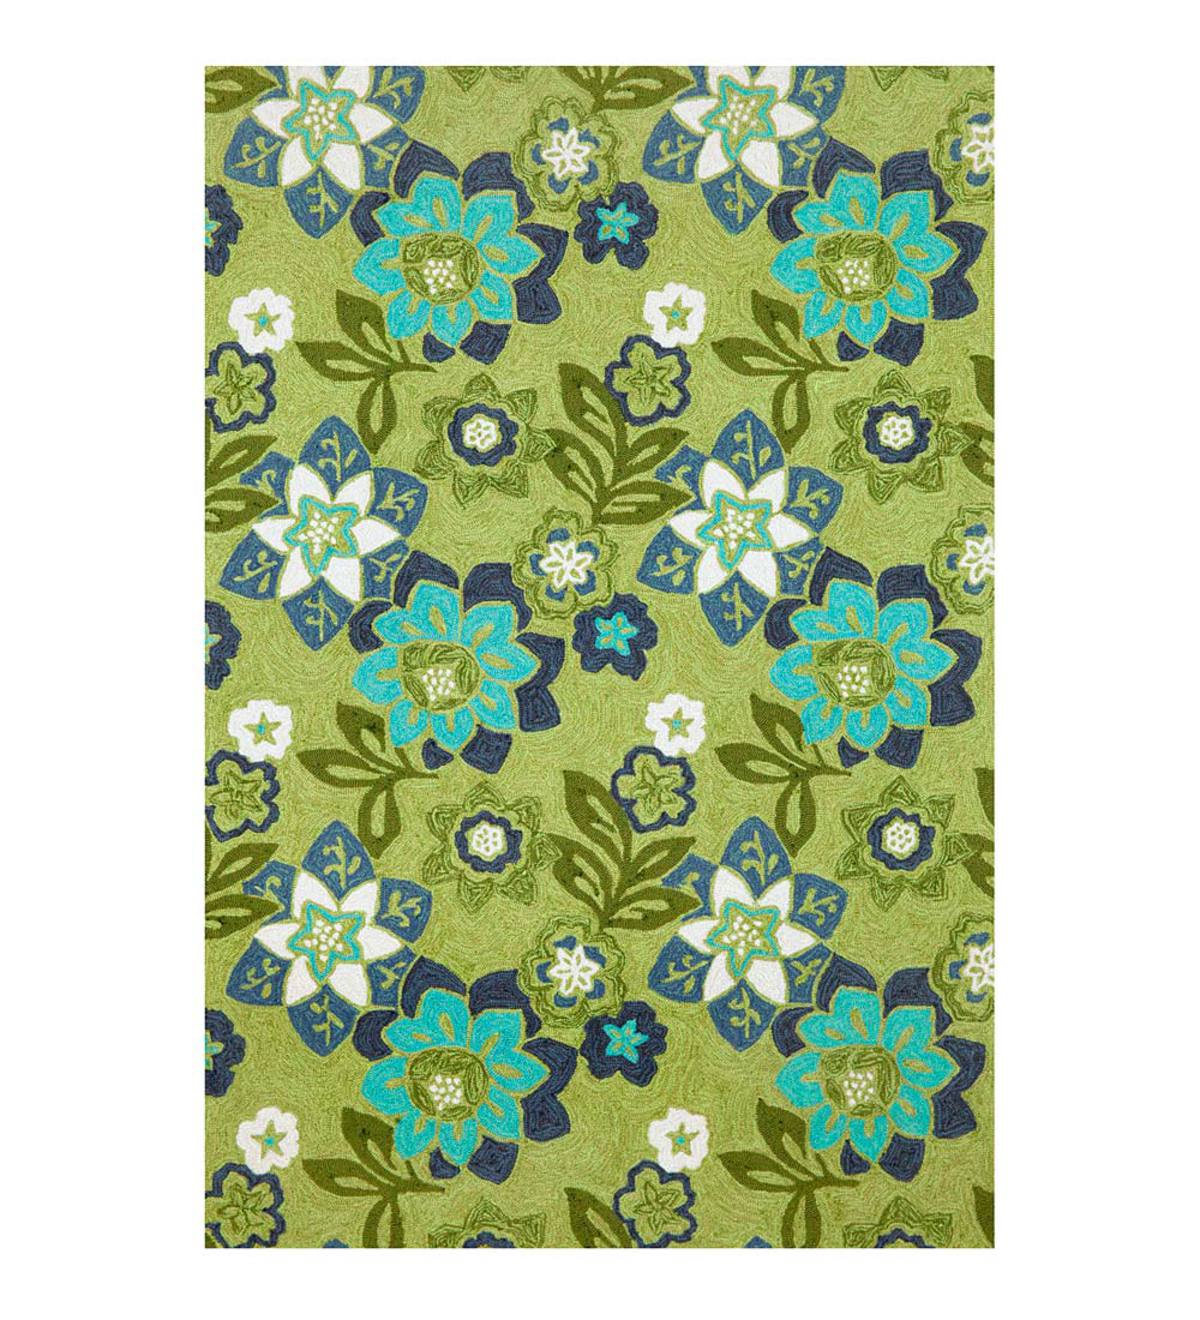 Blue and Green Floral Accent Rug, 8'3"W x 11'6"L - Green